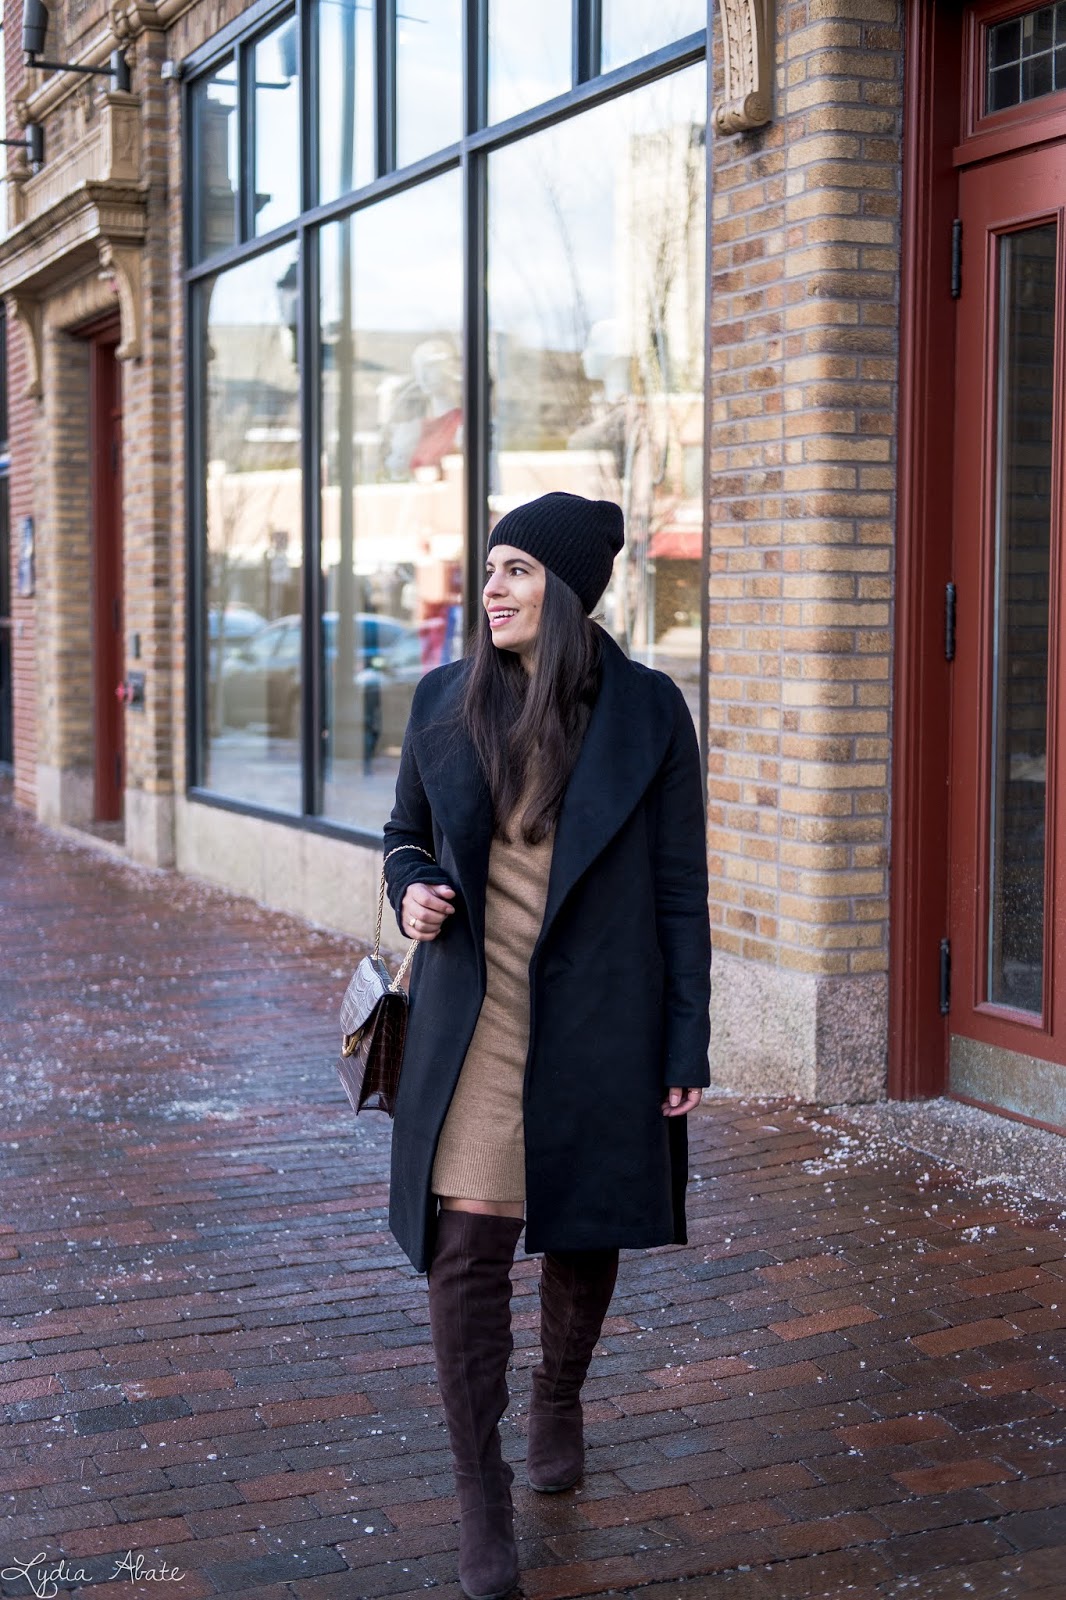 Winterized - Chic on the Cheap  Connecticut based style blogger on a  budget, by Lydia Abate